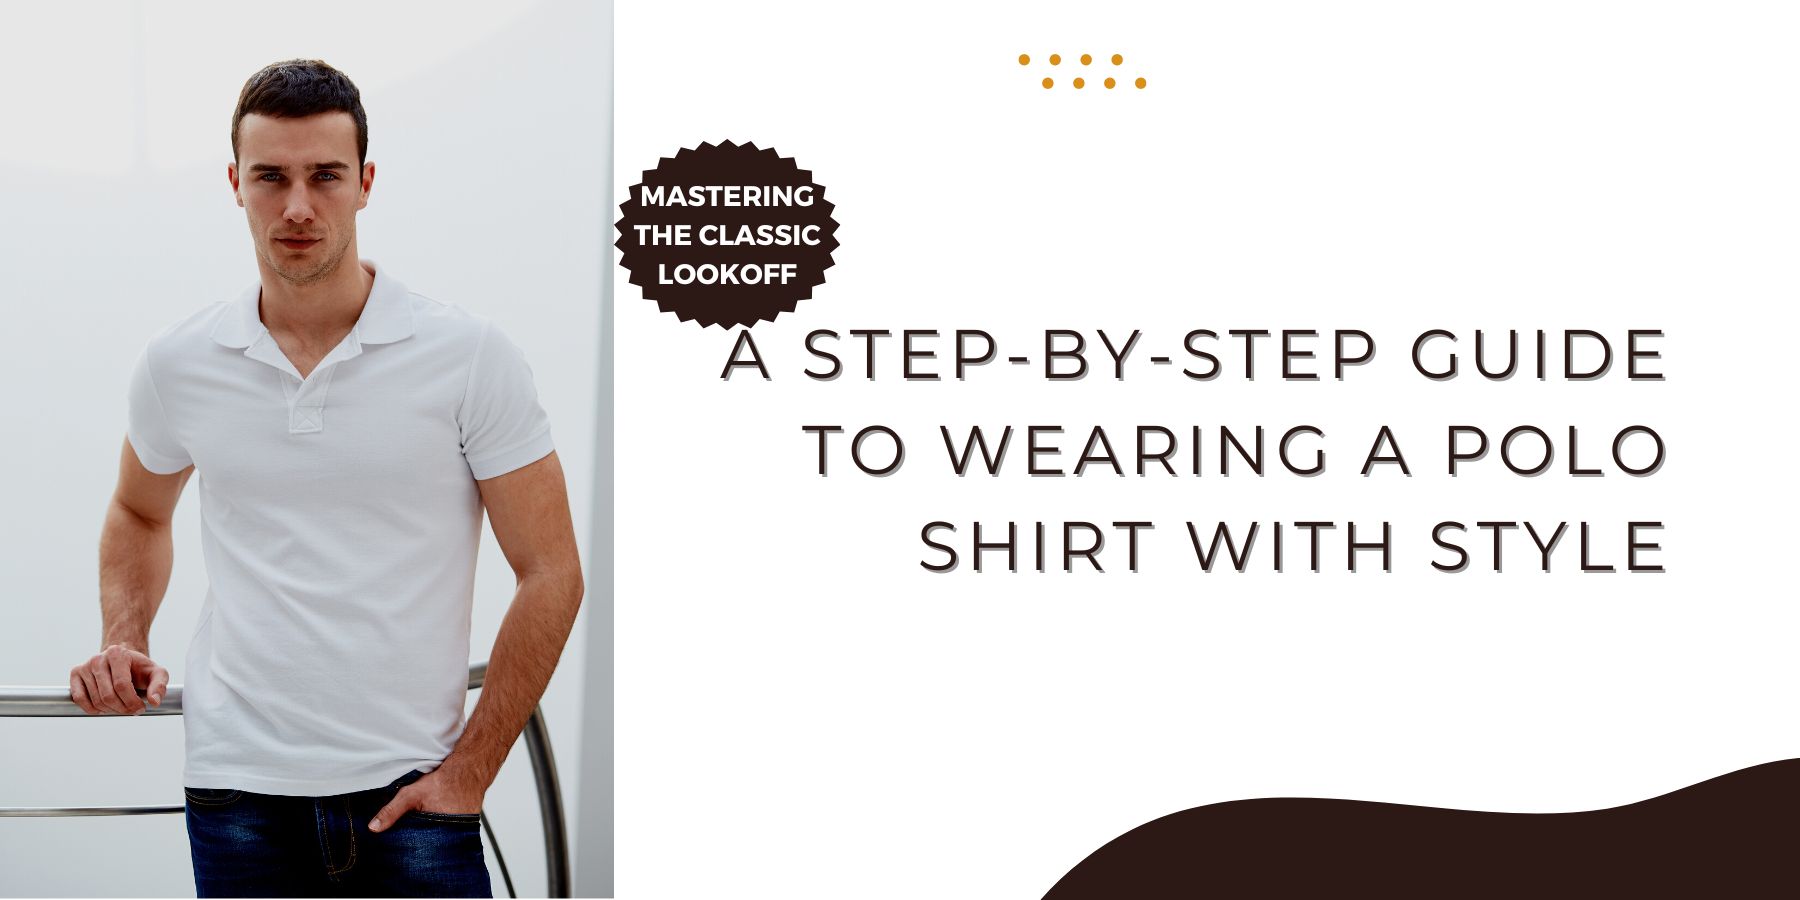 Mastering the Classic Look: A Step-by-Step Guide to Wearing a Polo Shirt with Style